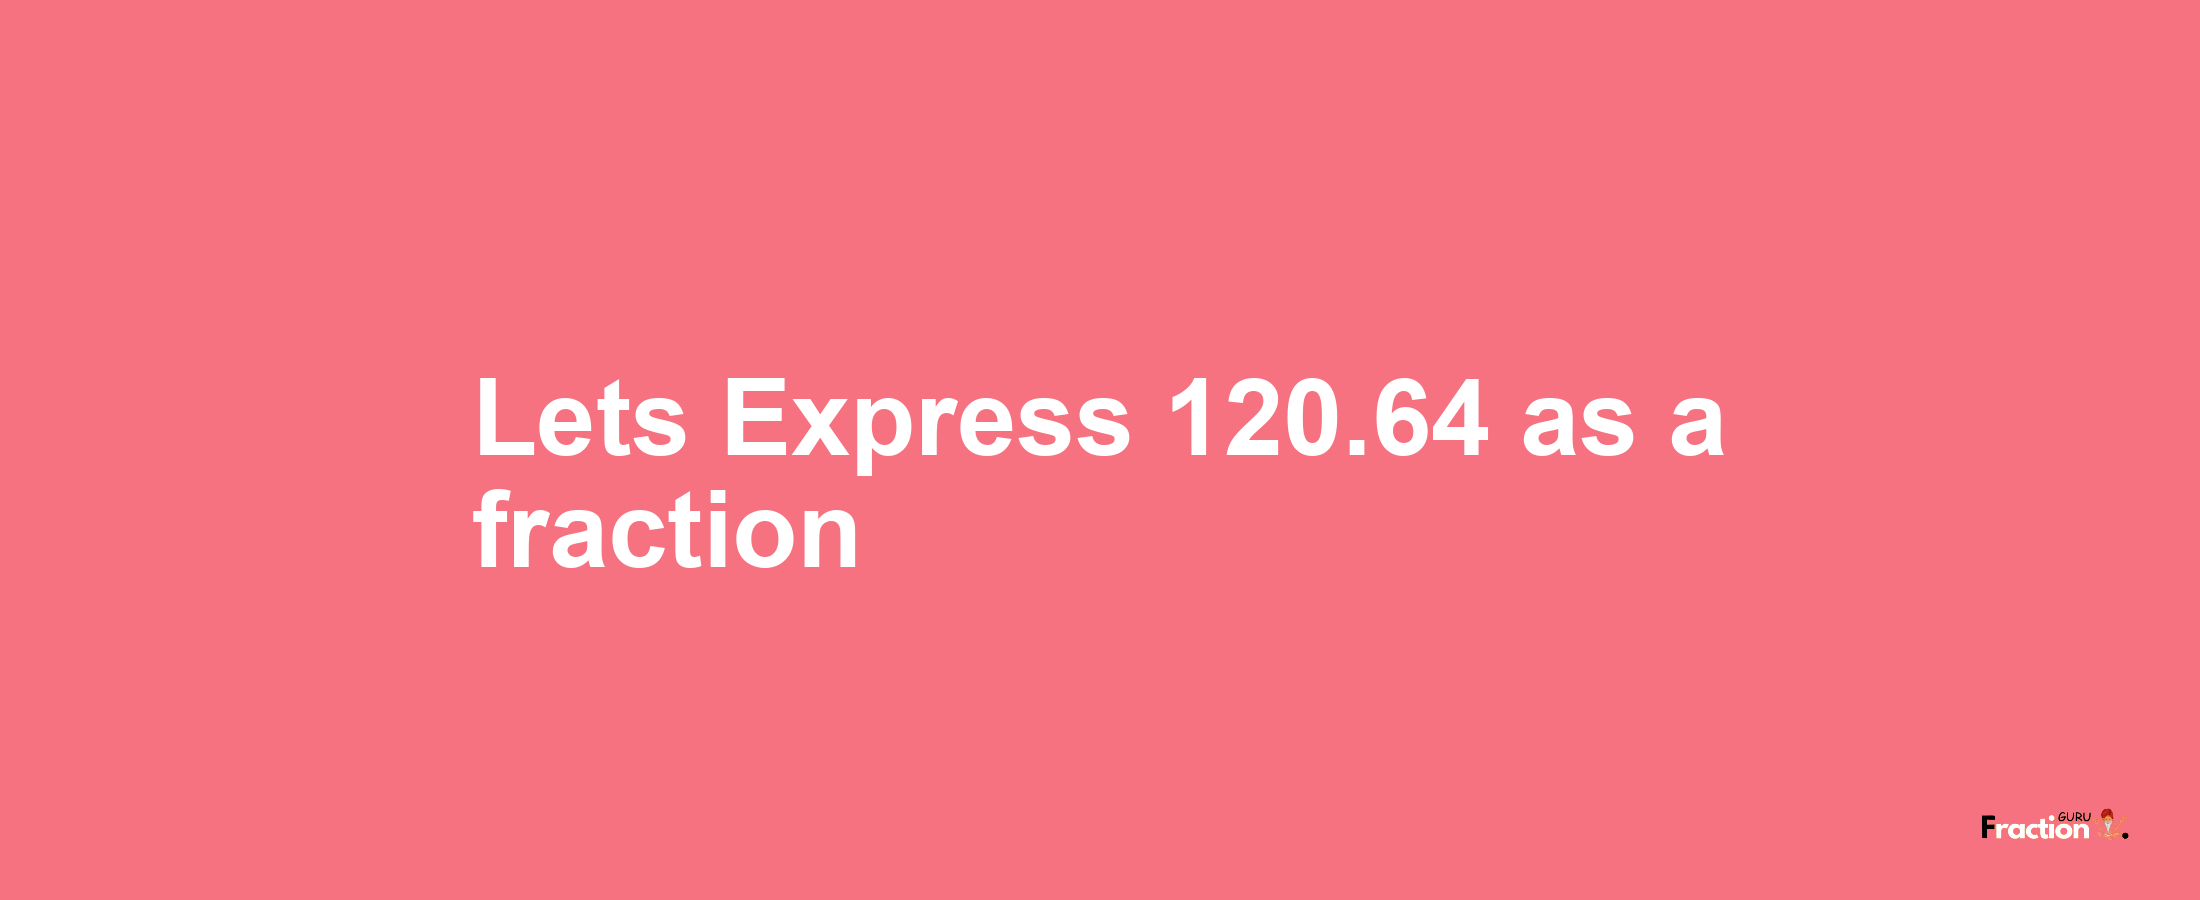 Lets Express 120.64 as afraction